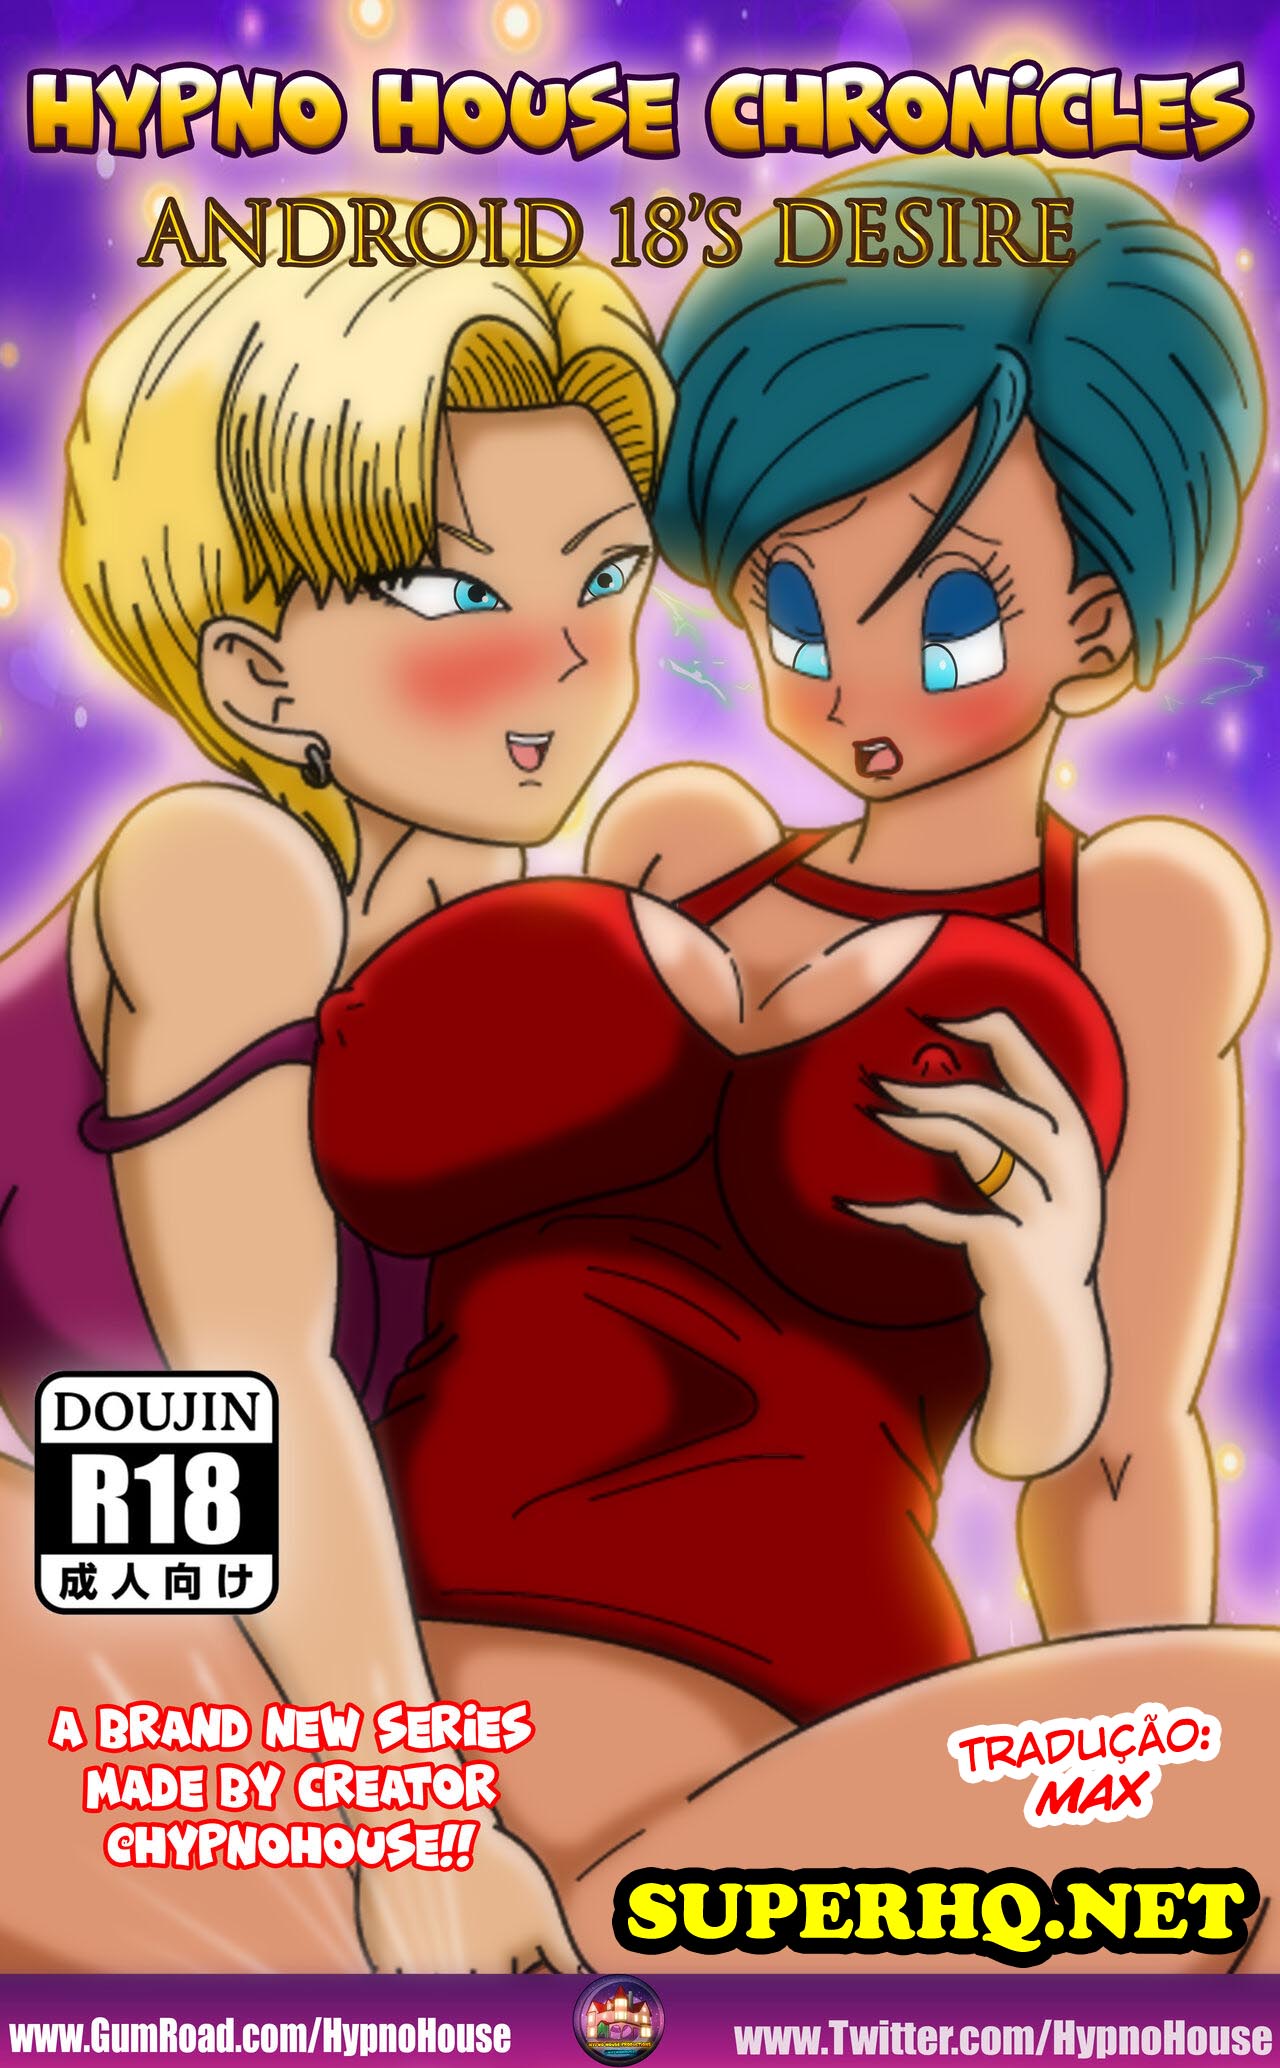 Hypno house chronicles - Android-18 1